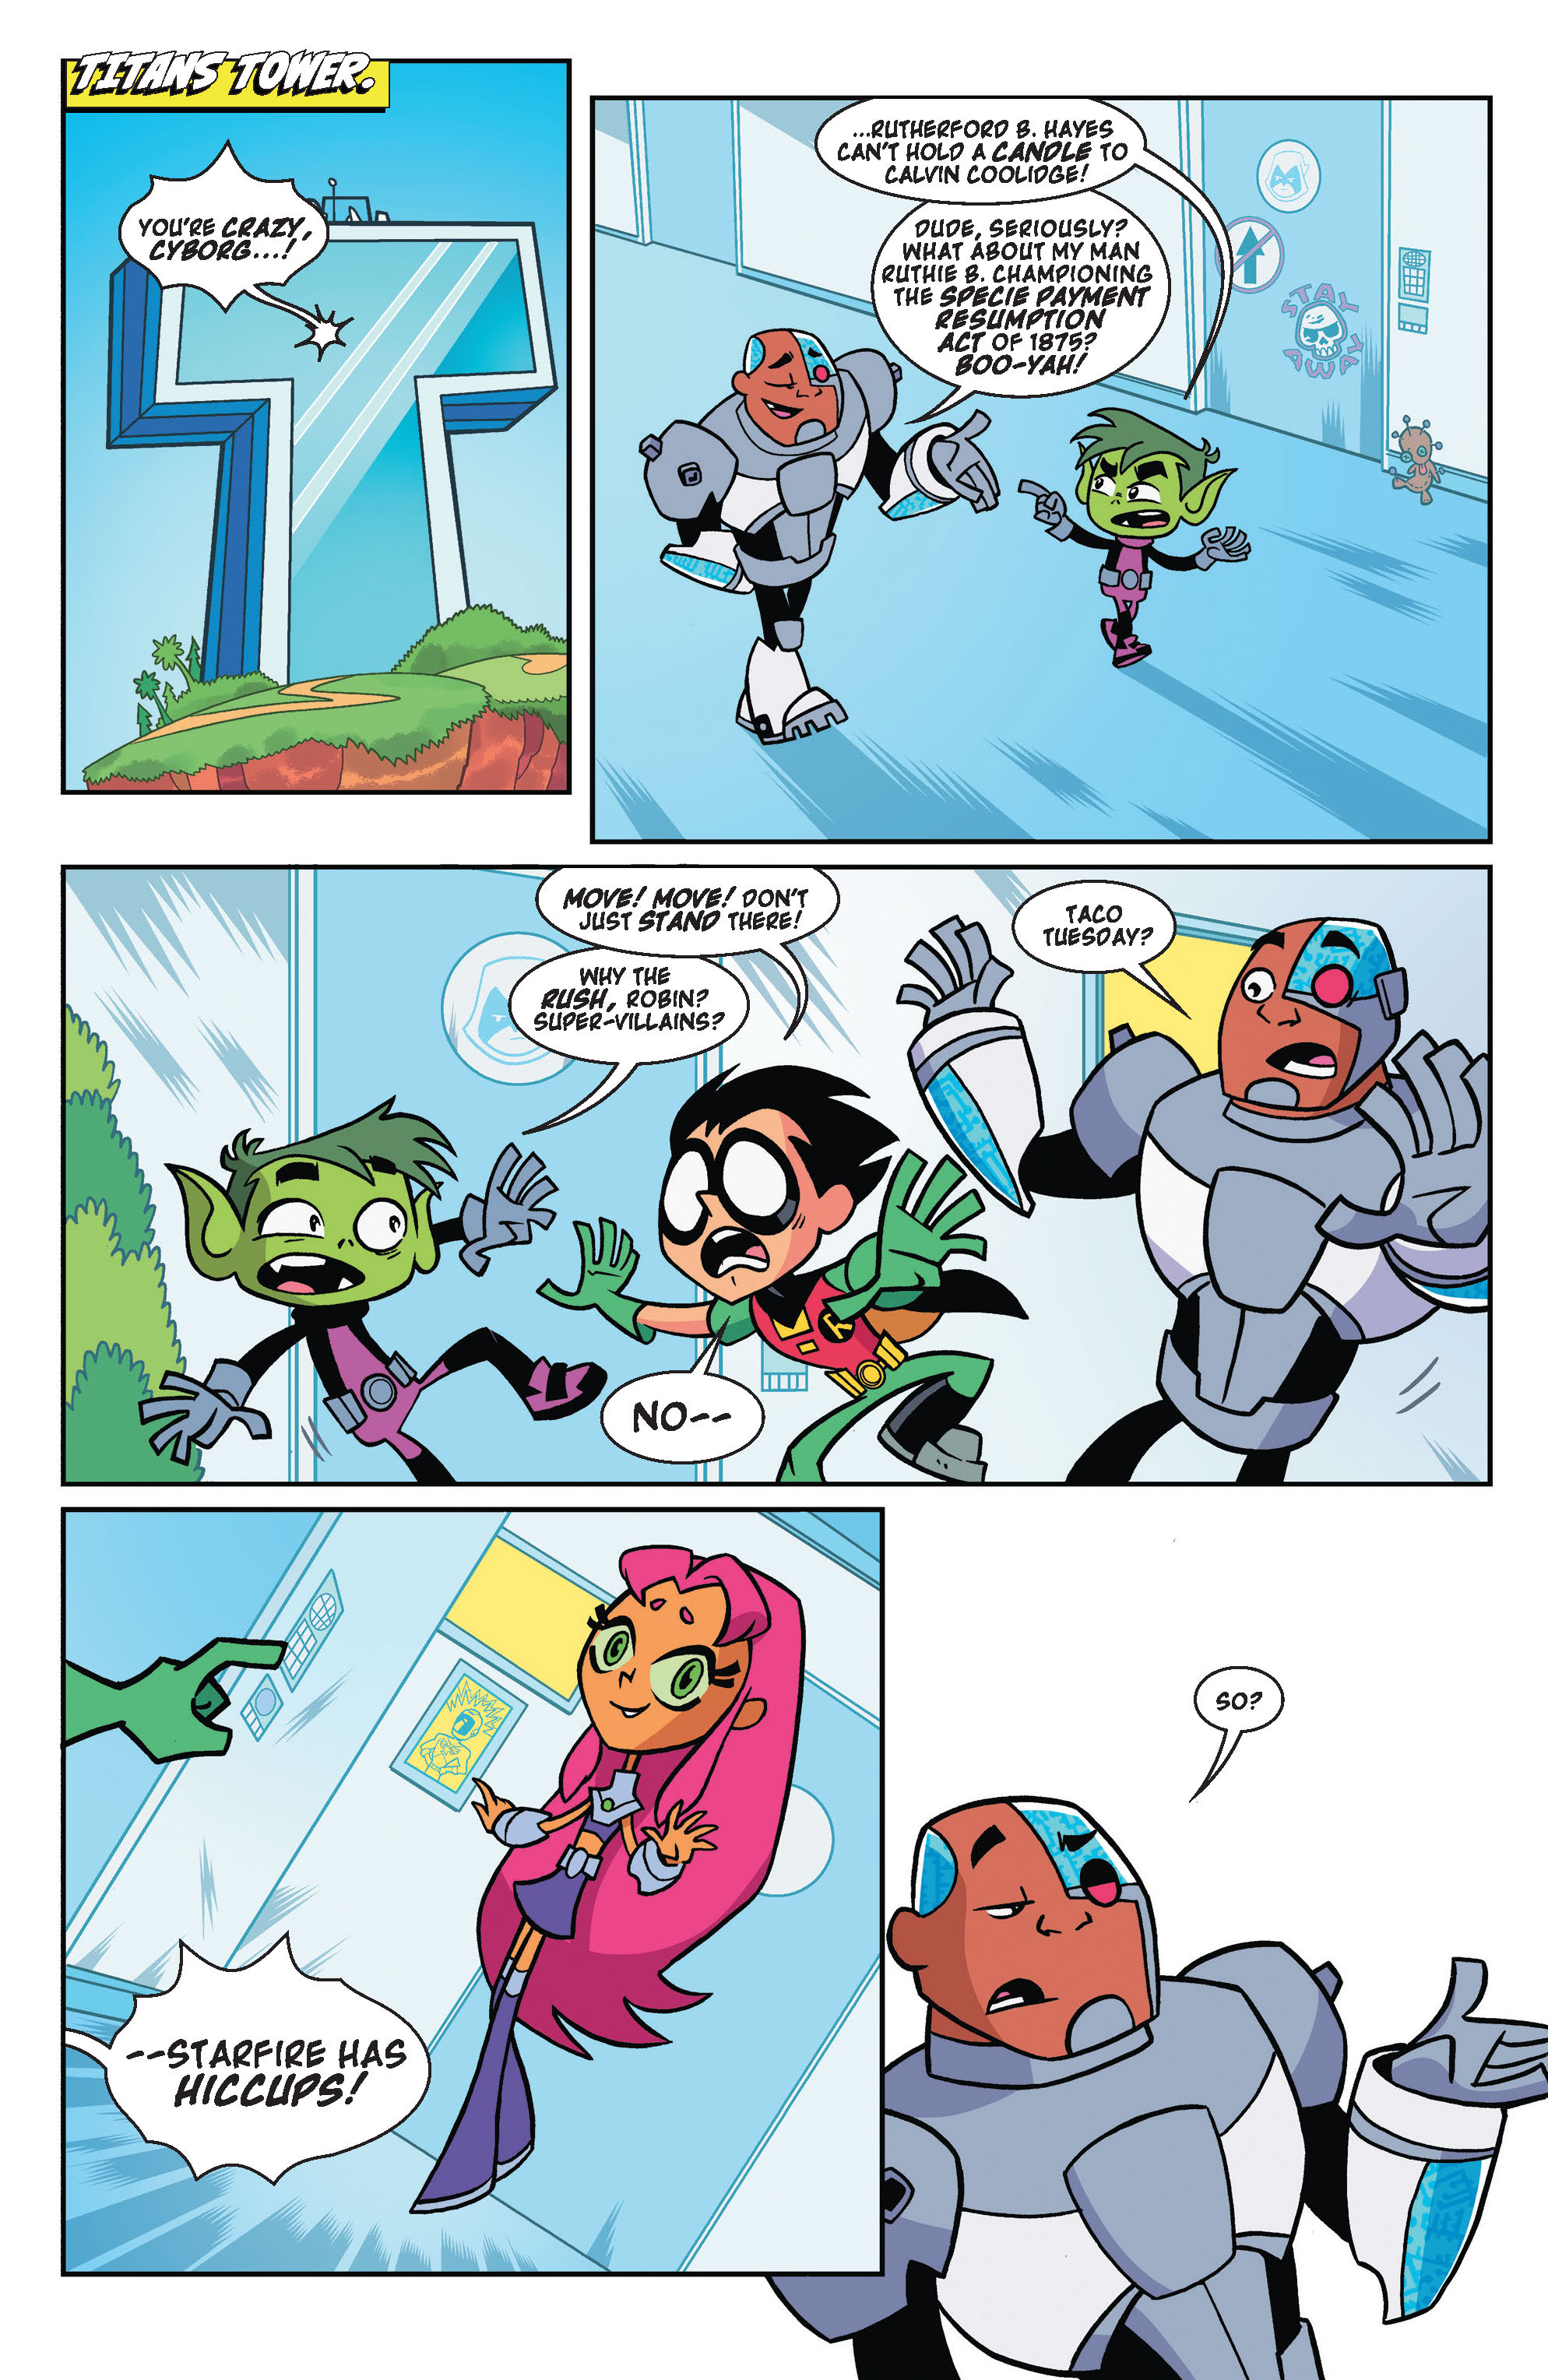 Teen Titans Go!: Booyah! (2020-): Chapter 1 - Page 2